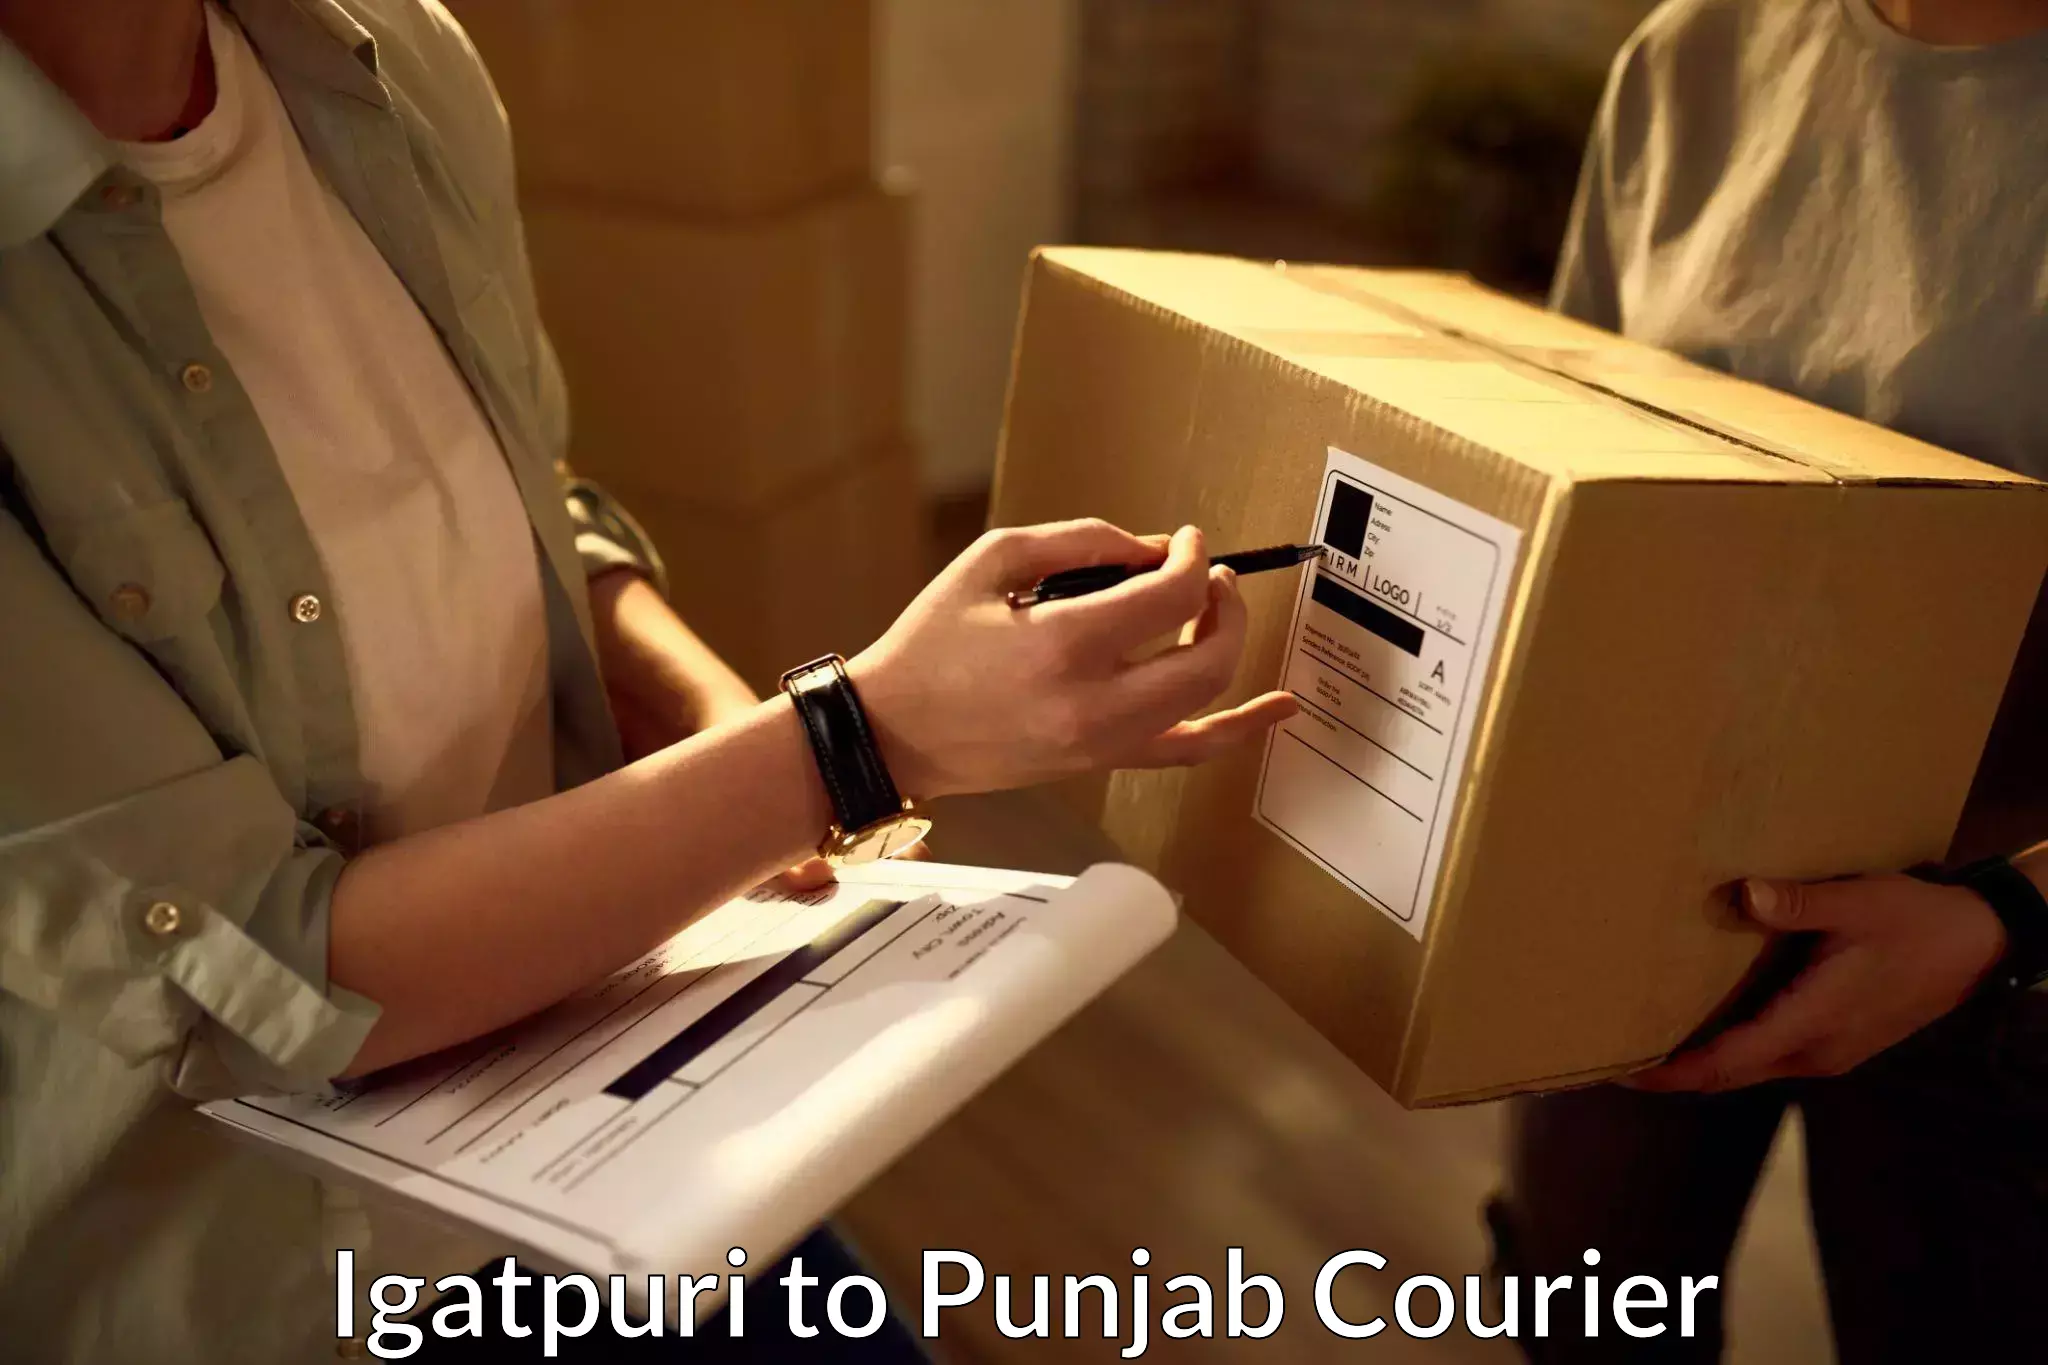 Local delivery service Igatpuri to Punjab